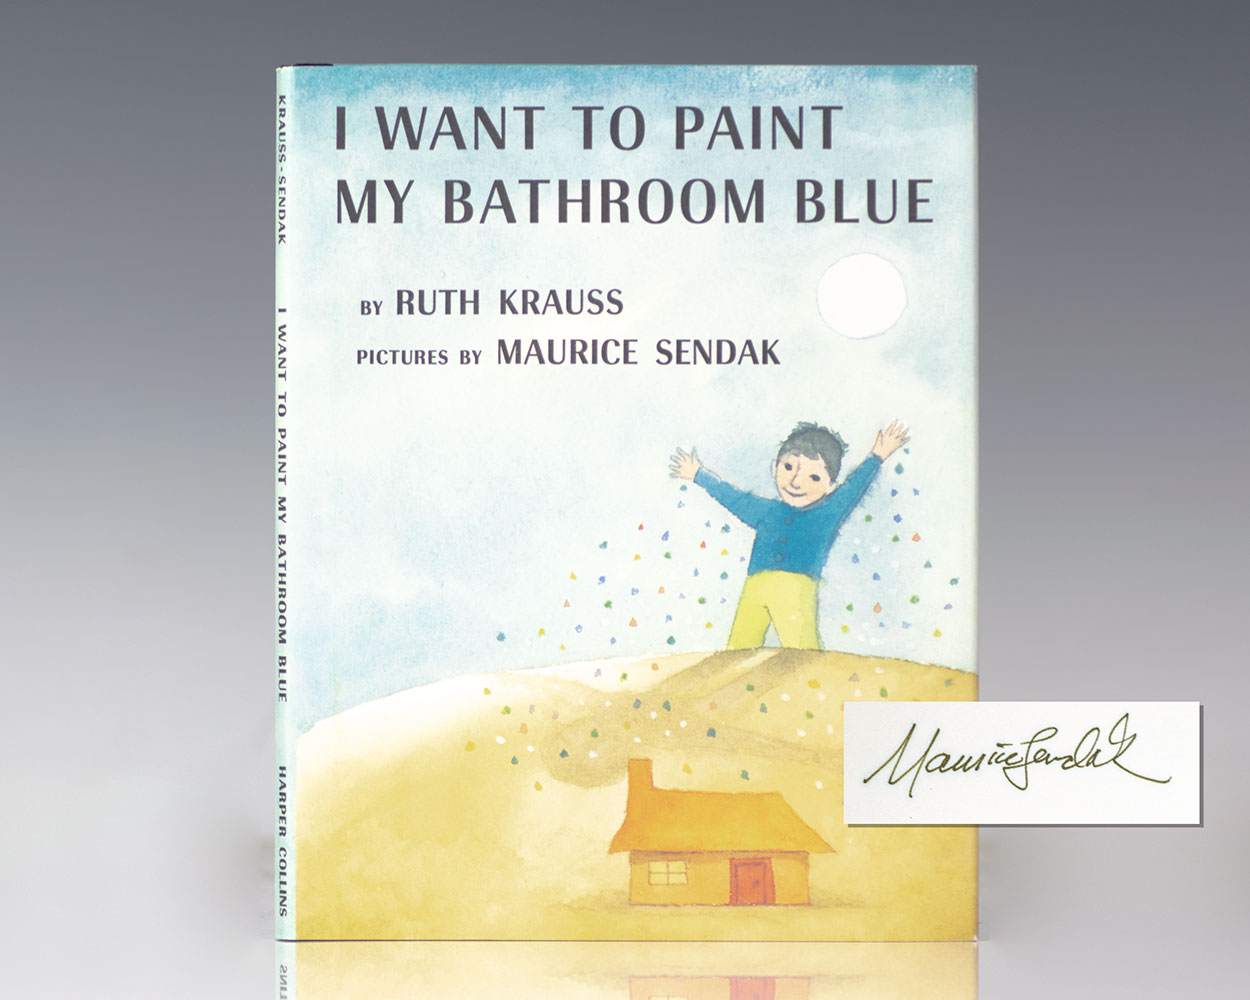 I Want To Paint My Bathroom Blue. - Raptis Rare Books | Fine Rare and  Antiquarian First Edition Books for Sale